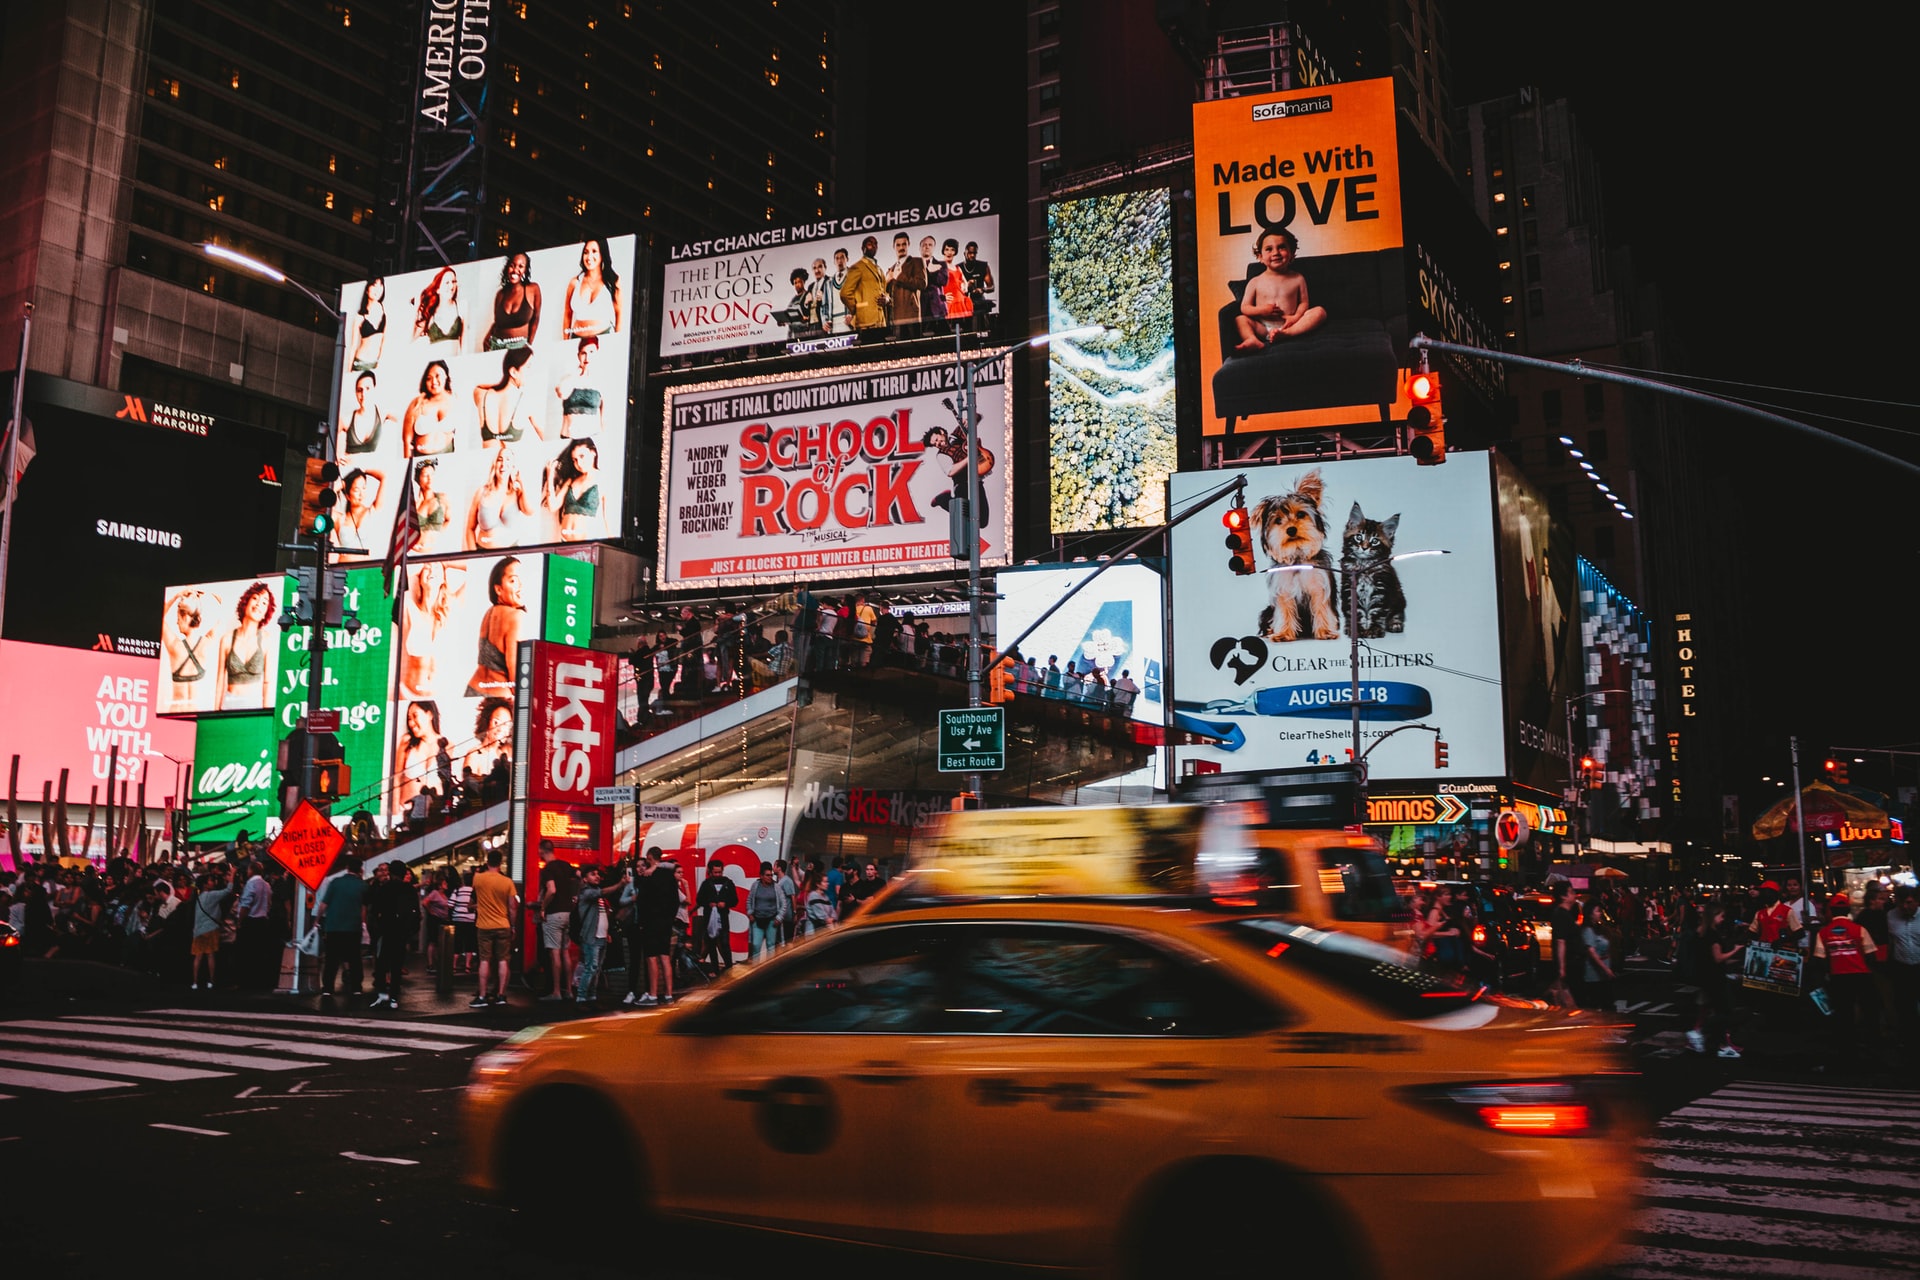 What Does OOH Advertising Mean in Marketing and What Counts As OOH and What Approaches Can You Take to Deploy it